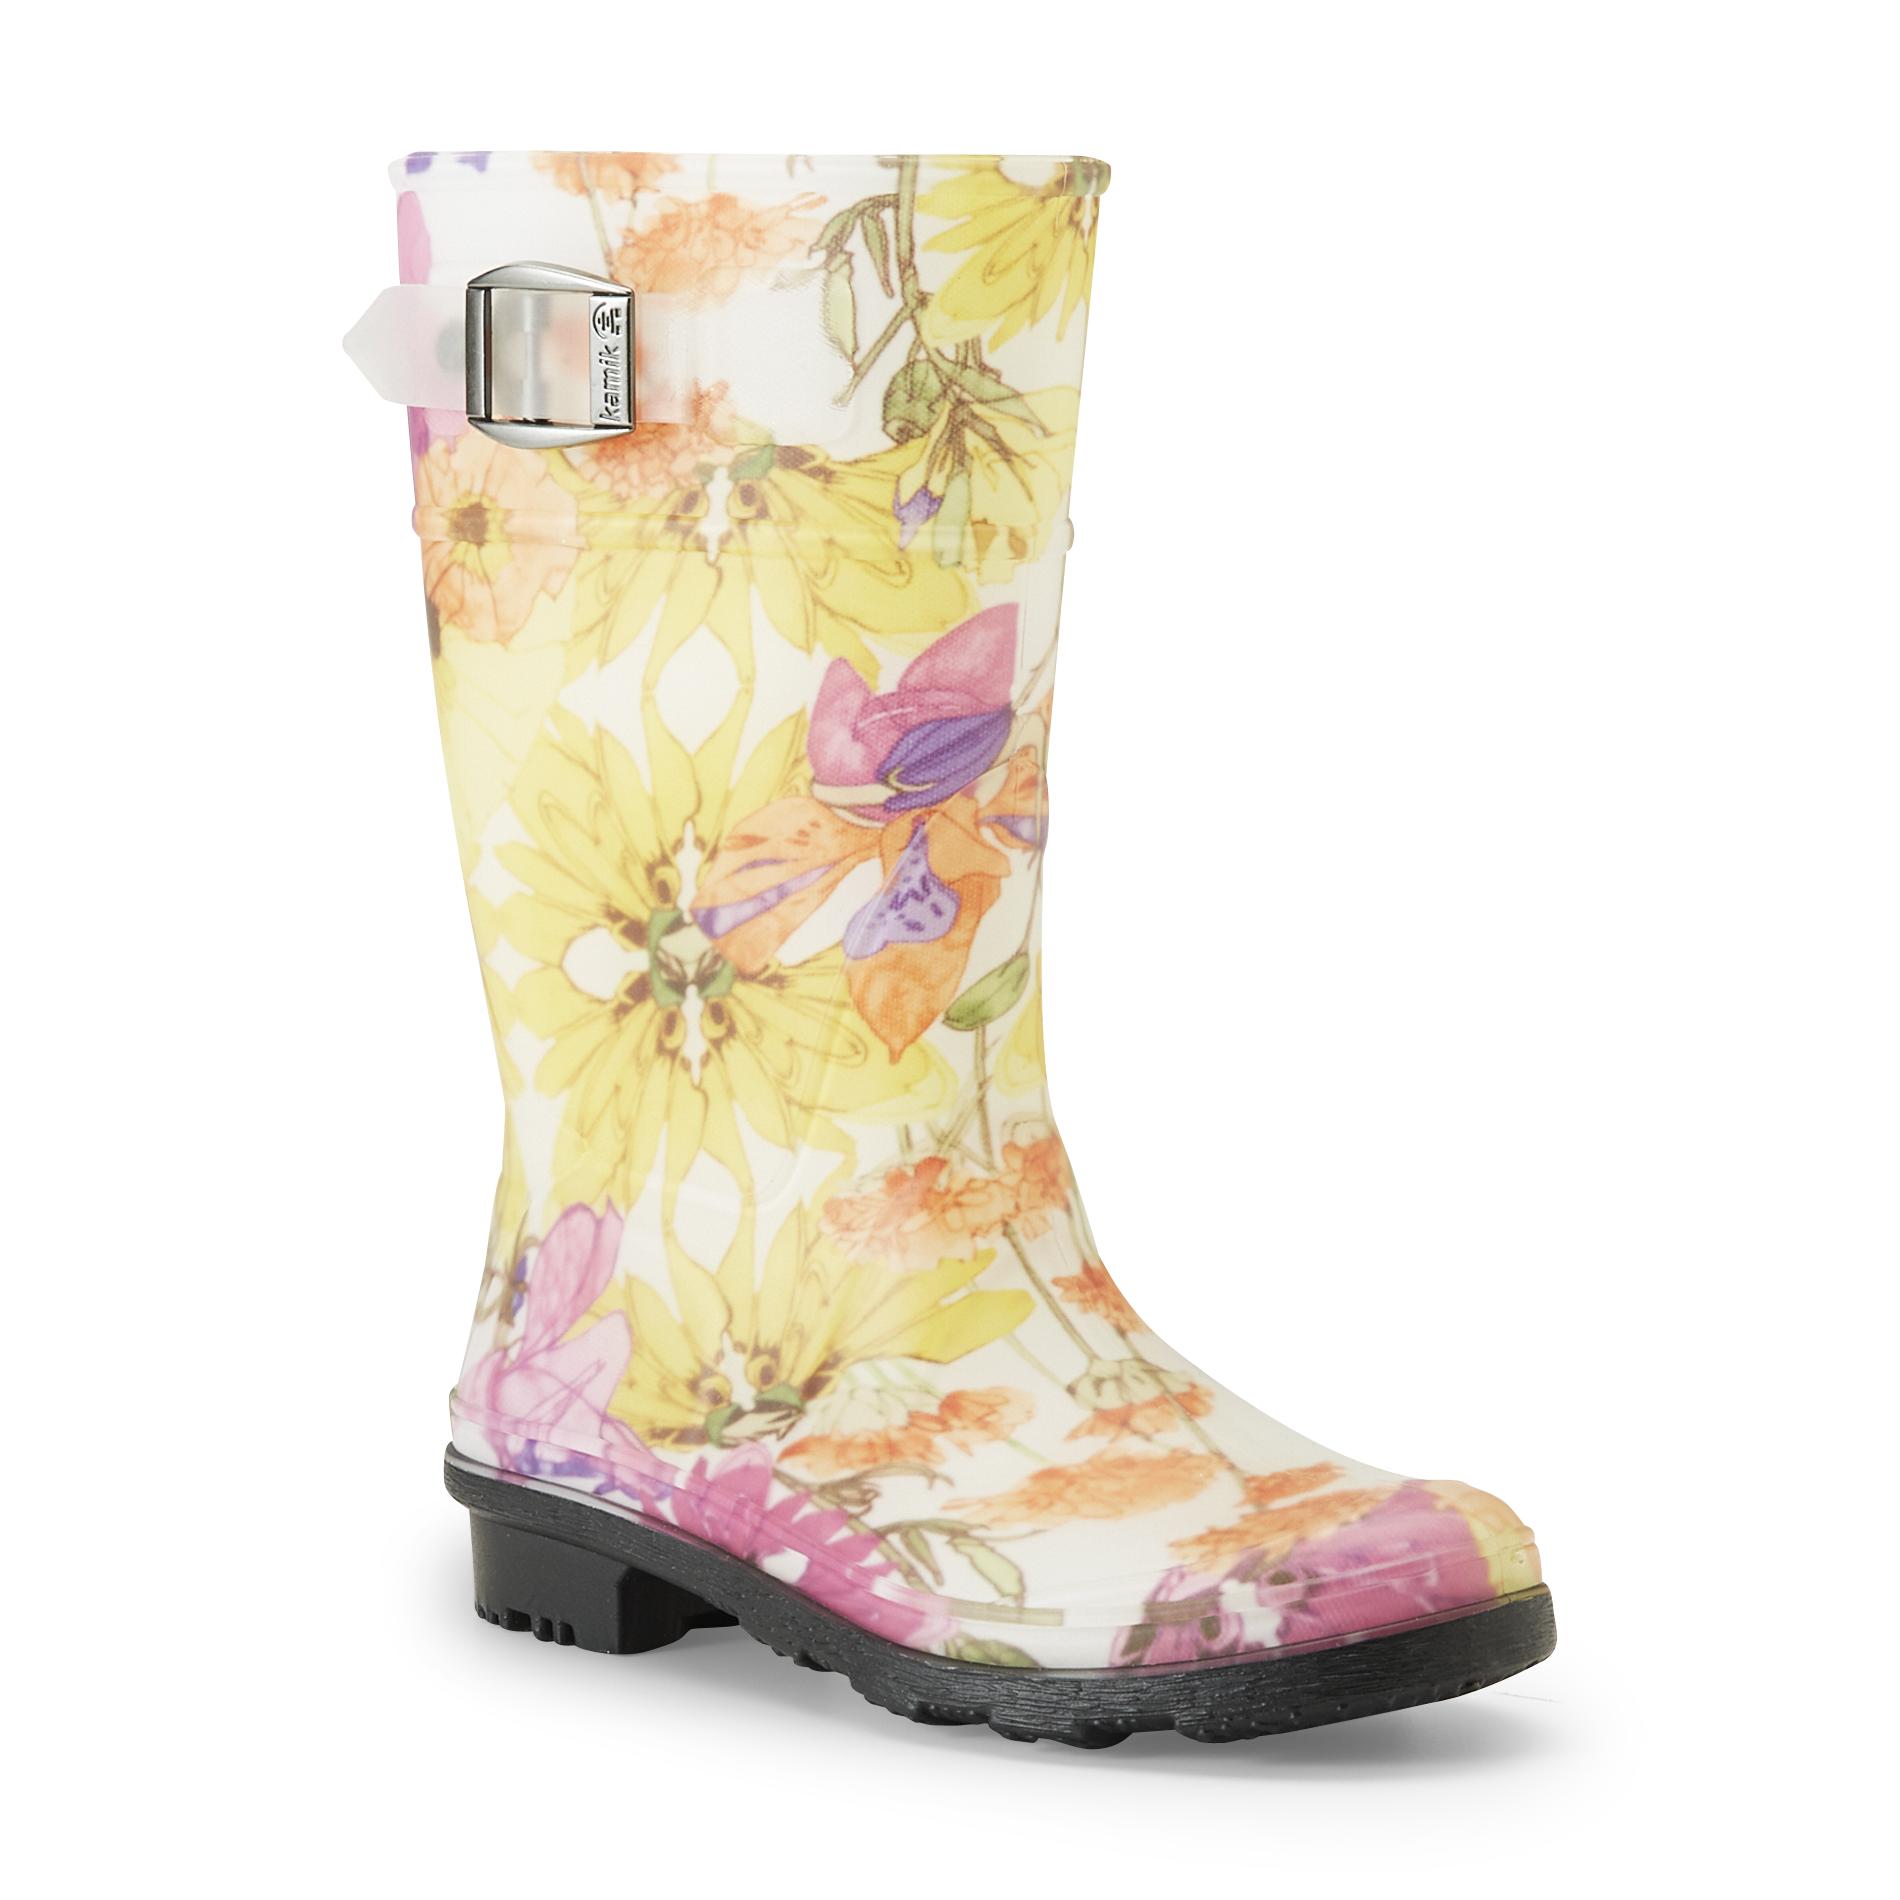 Kamik Girl's 9" Pink/Floral Water-Resistant Pull-On Rain Boot